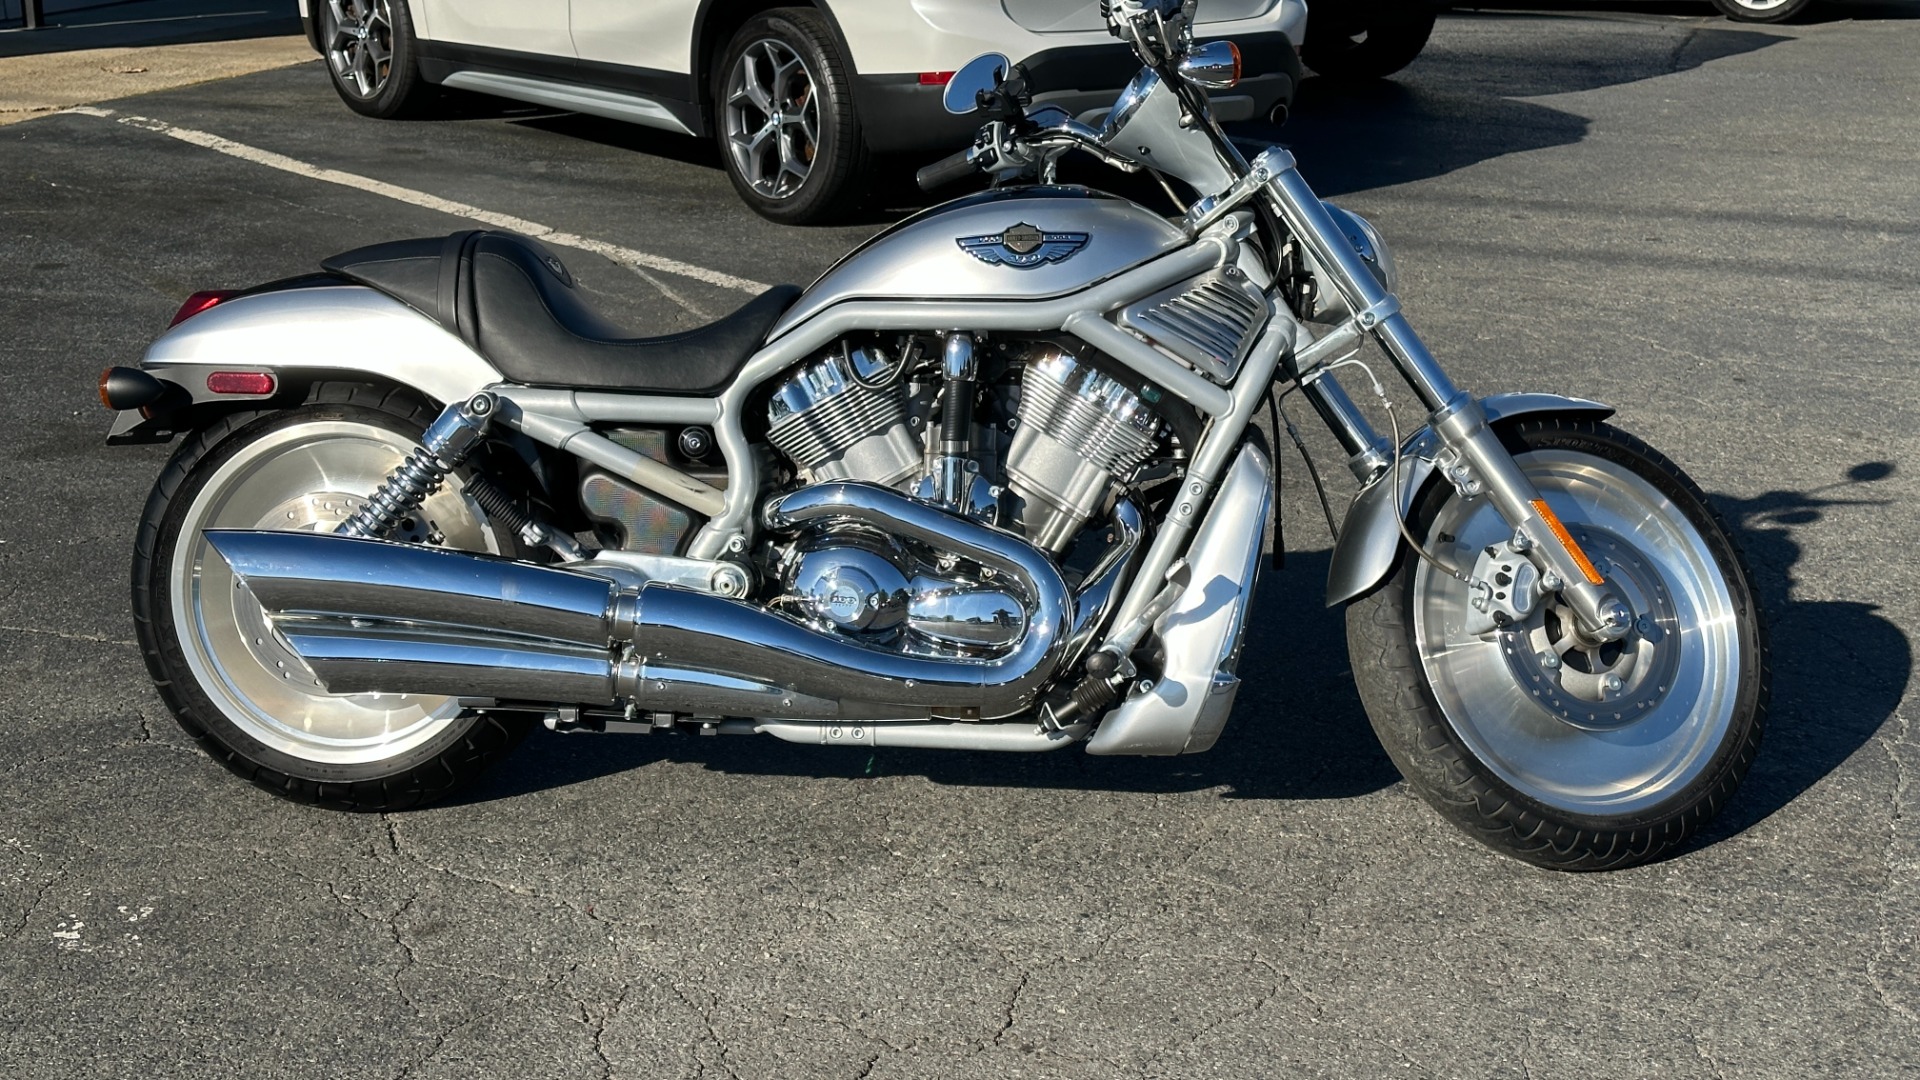 Used 2003 Harley Davidson V Rod ANNIVERSARY EDITION / 1130CC ENGINE / BREMBO BRAKES / VORTEX AIR SCOOPS for sale $7,995 at Formula Imports in Charlotte NC 28227 3